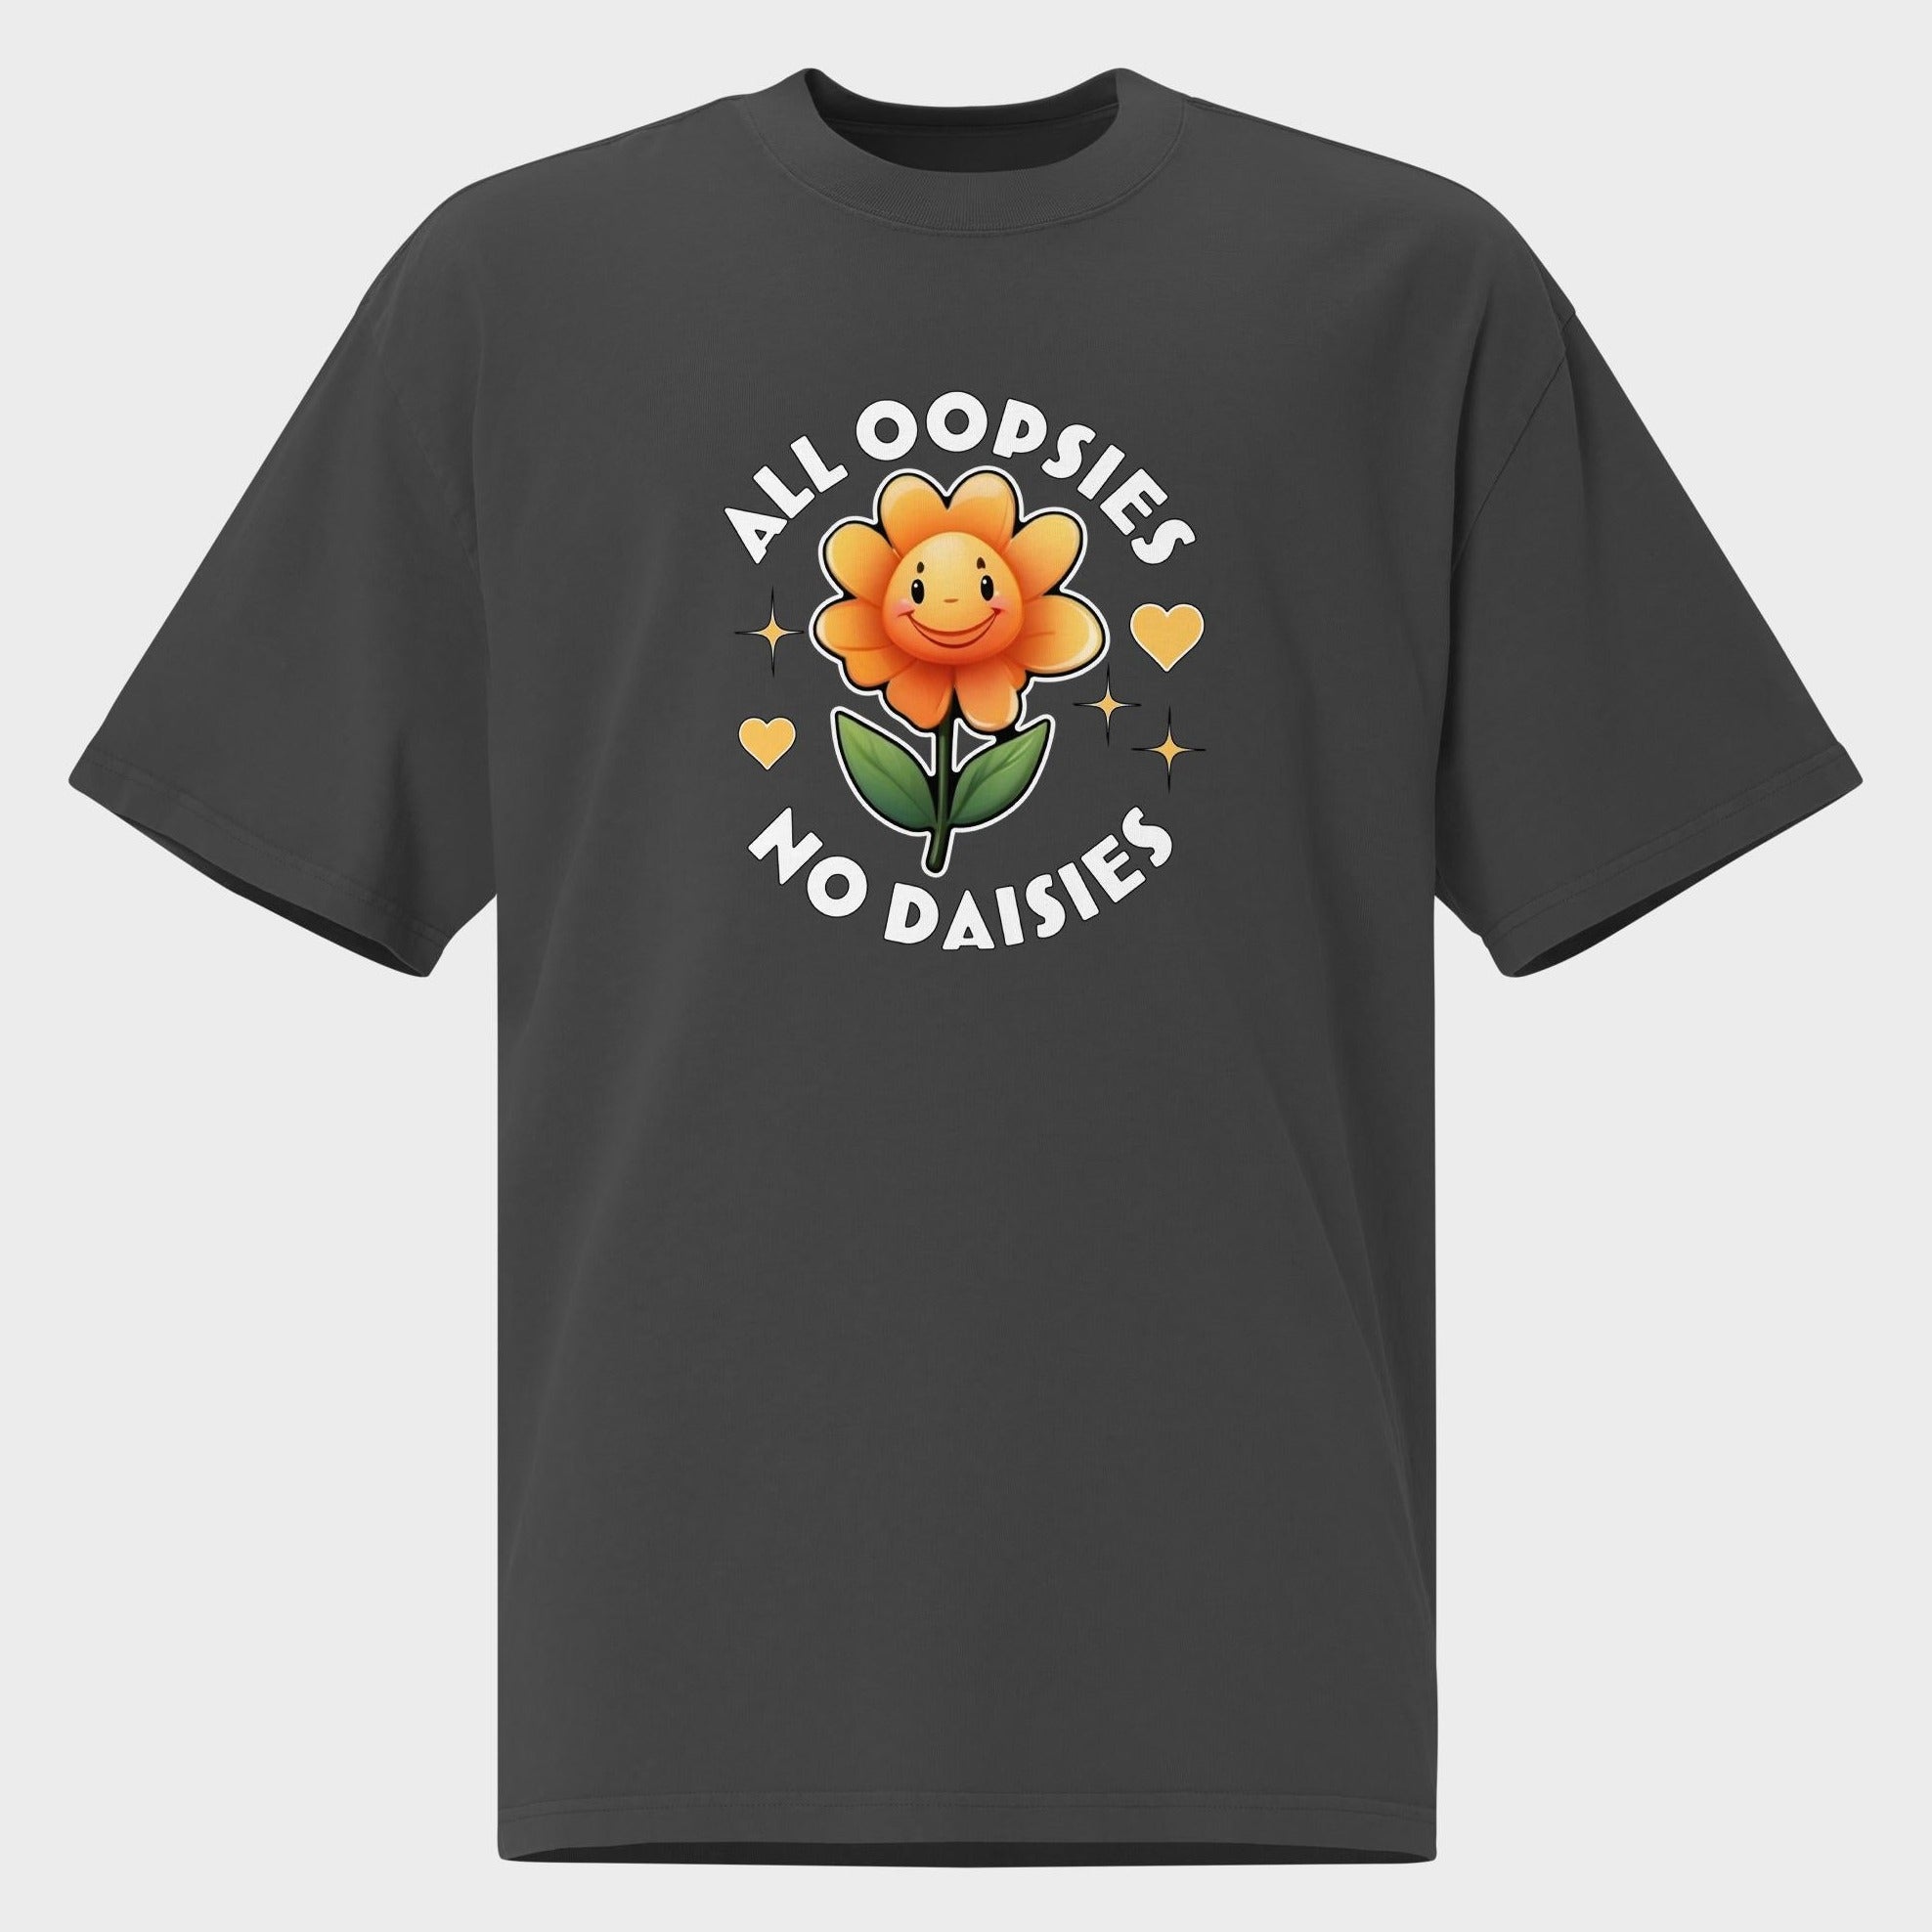 All Oopsies. No Daisies. - Oversized T-Shirt